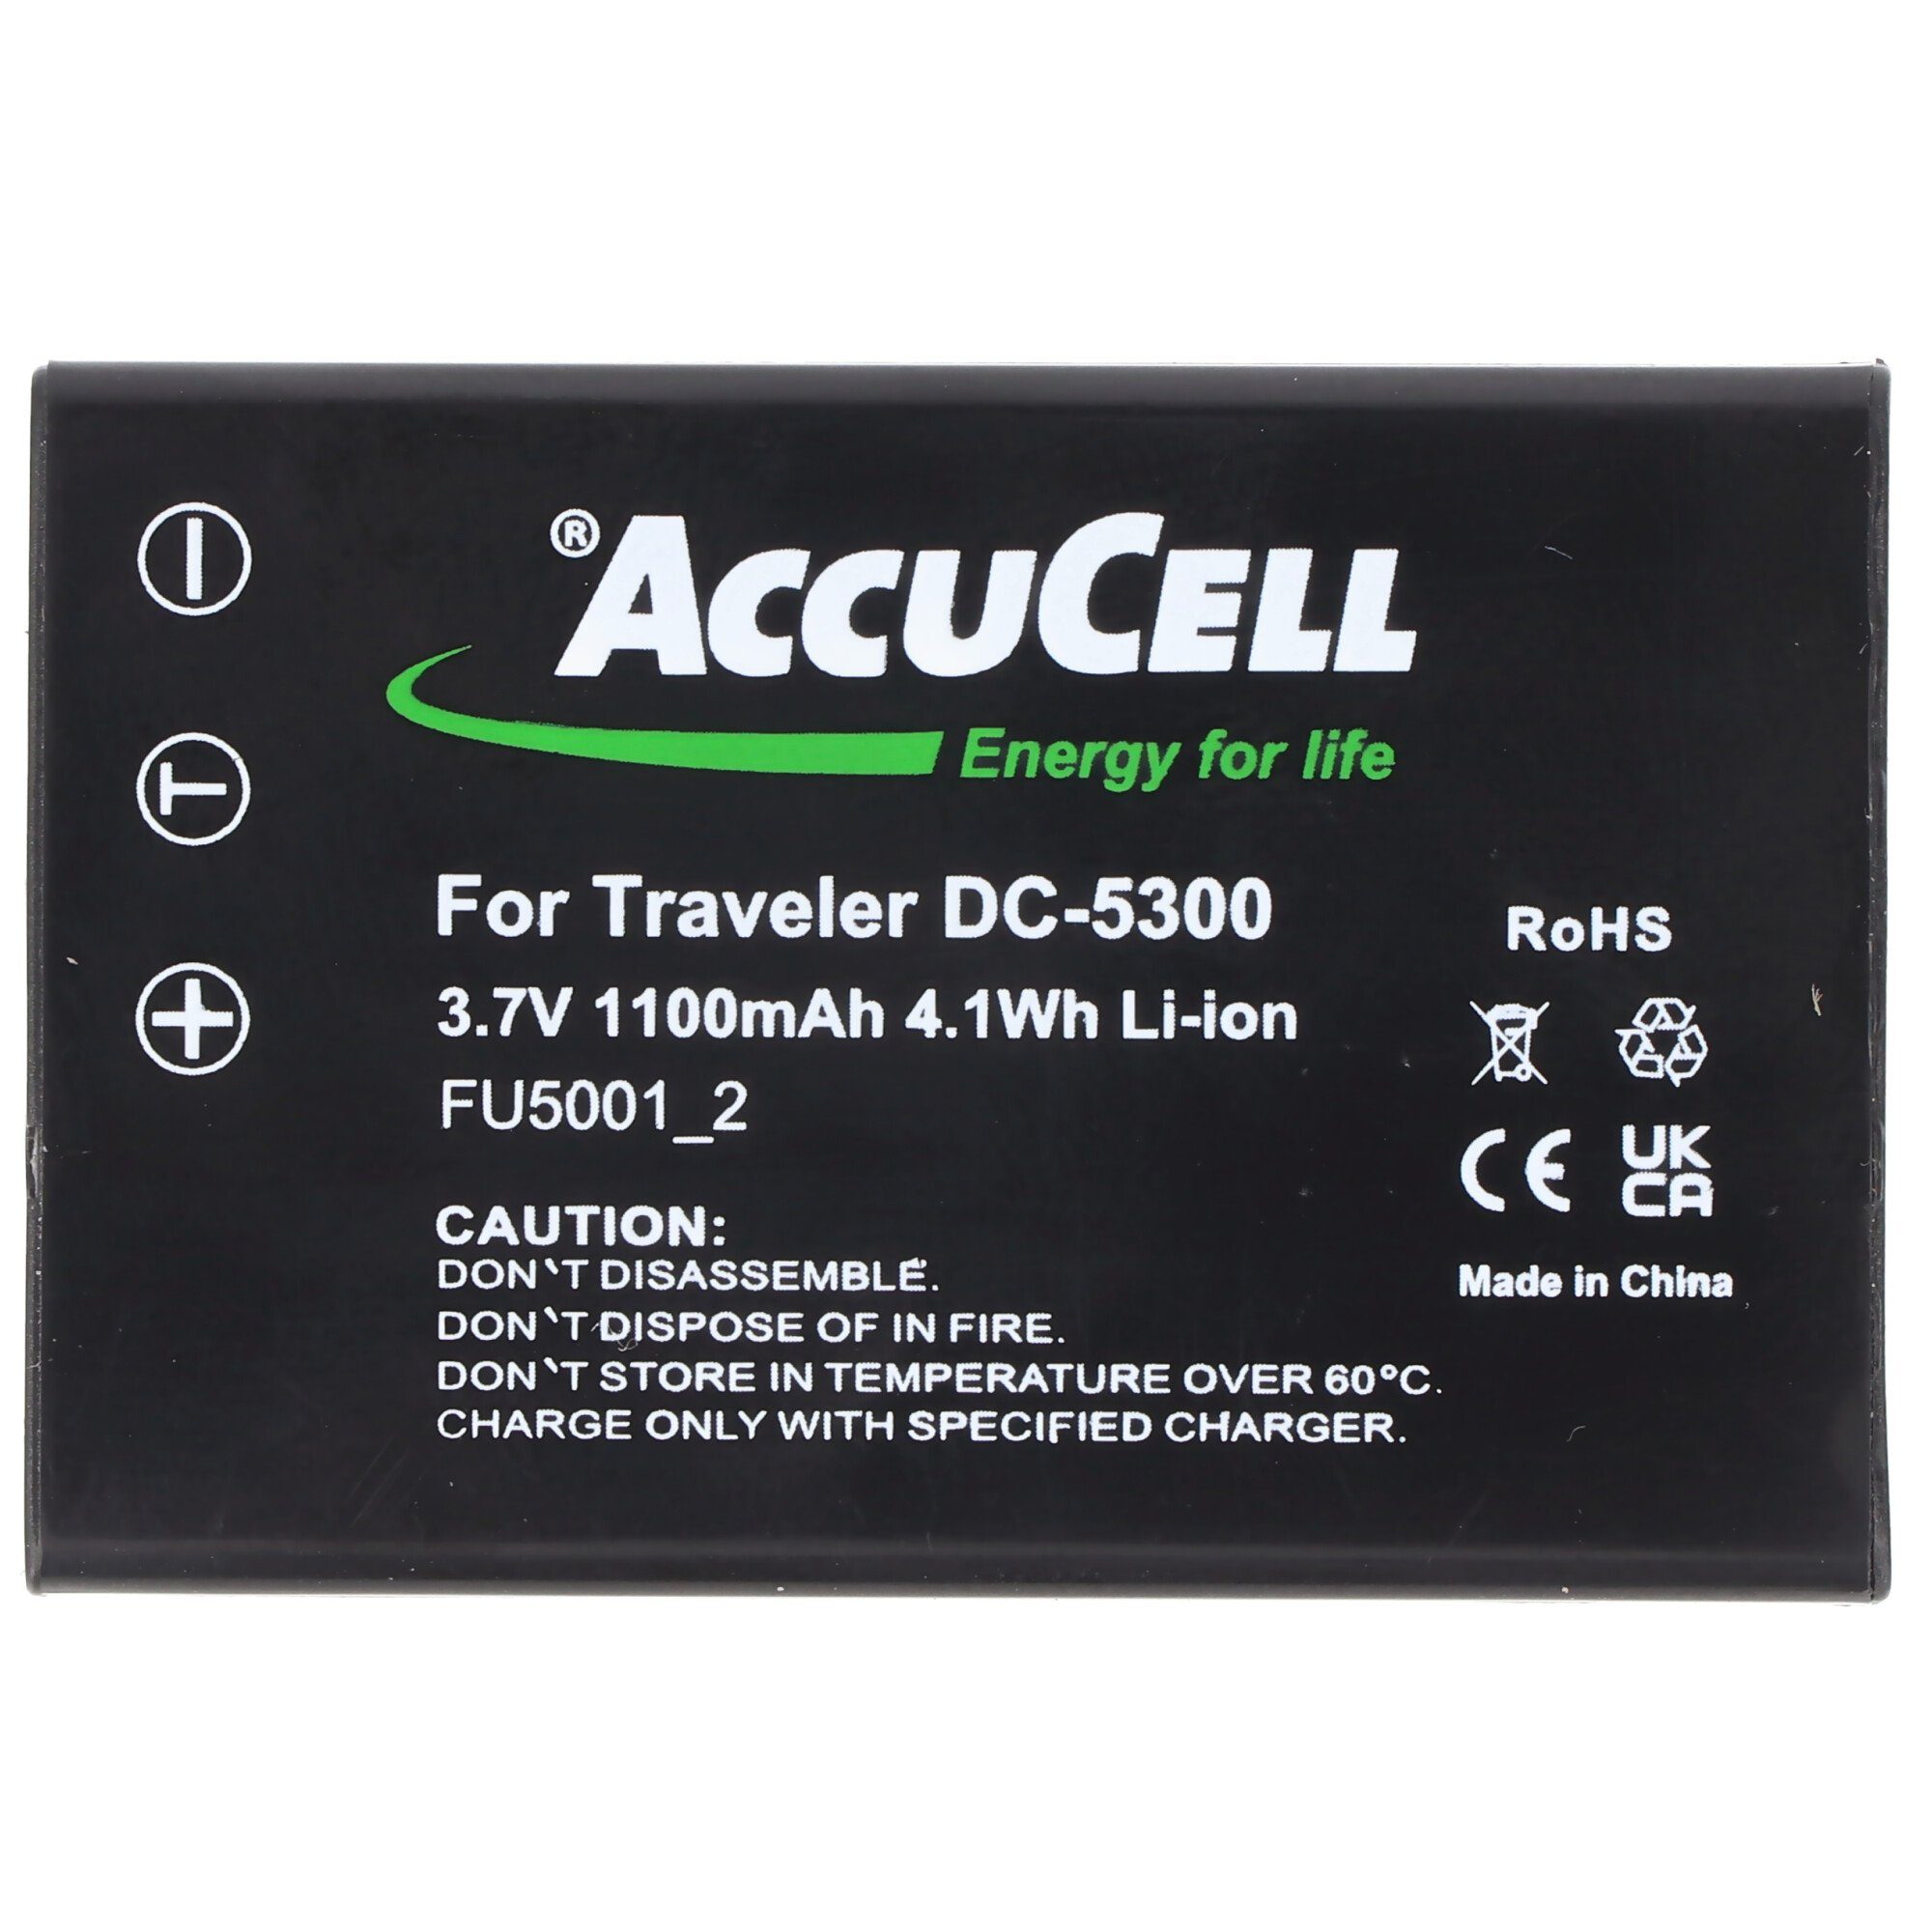 AccuCell mAh 950 für 330, AccuCell Akku (3,7 MEDION 330 passend V) EE-Pack Akku EE-Pack